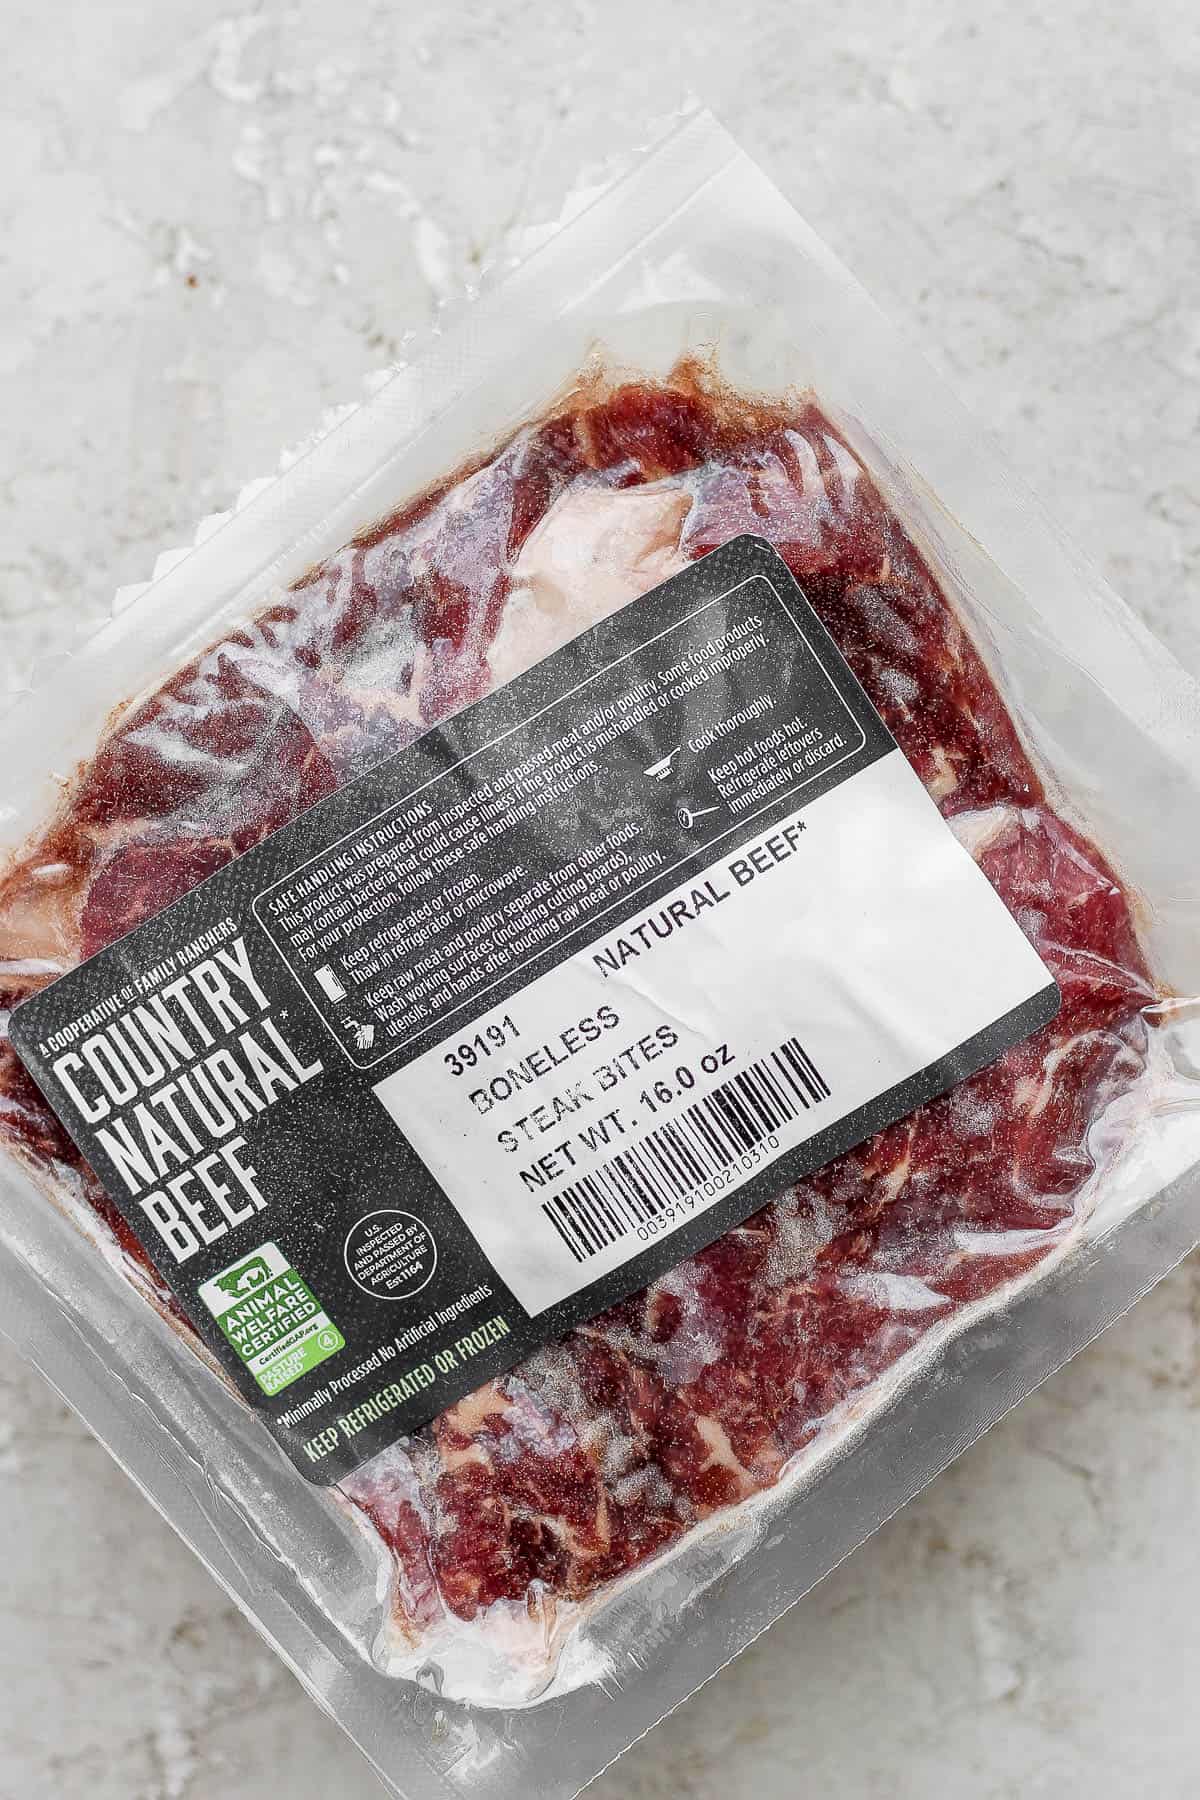 A package of Country Natural Beef Steak Bites.